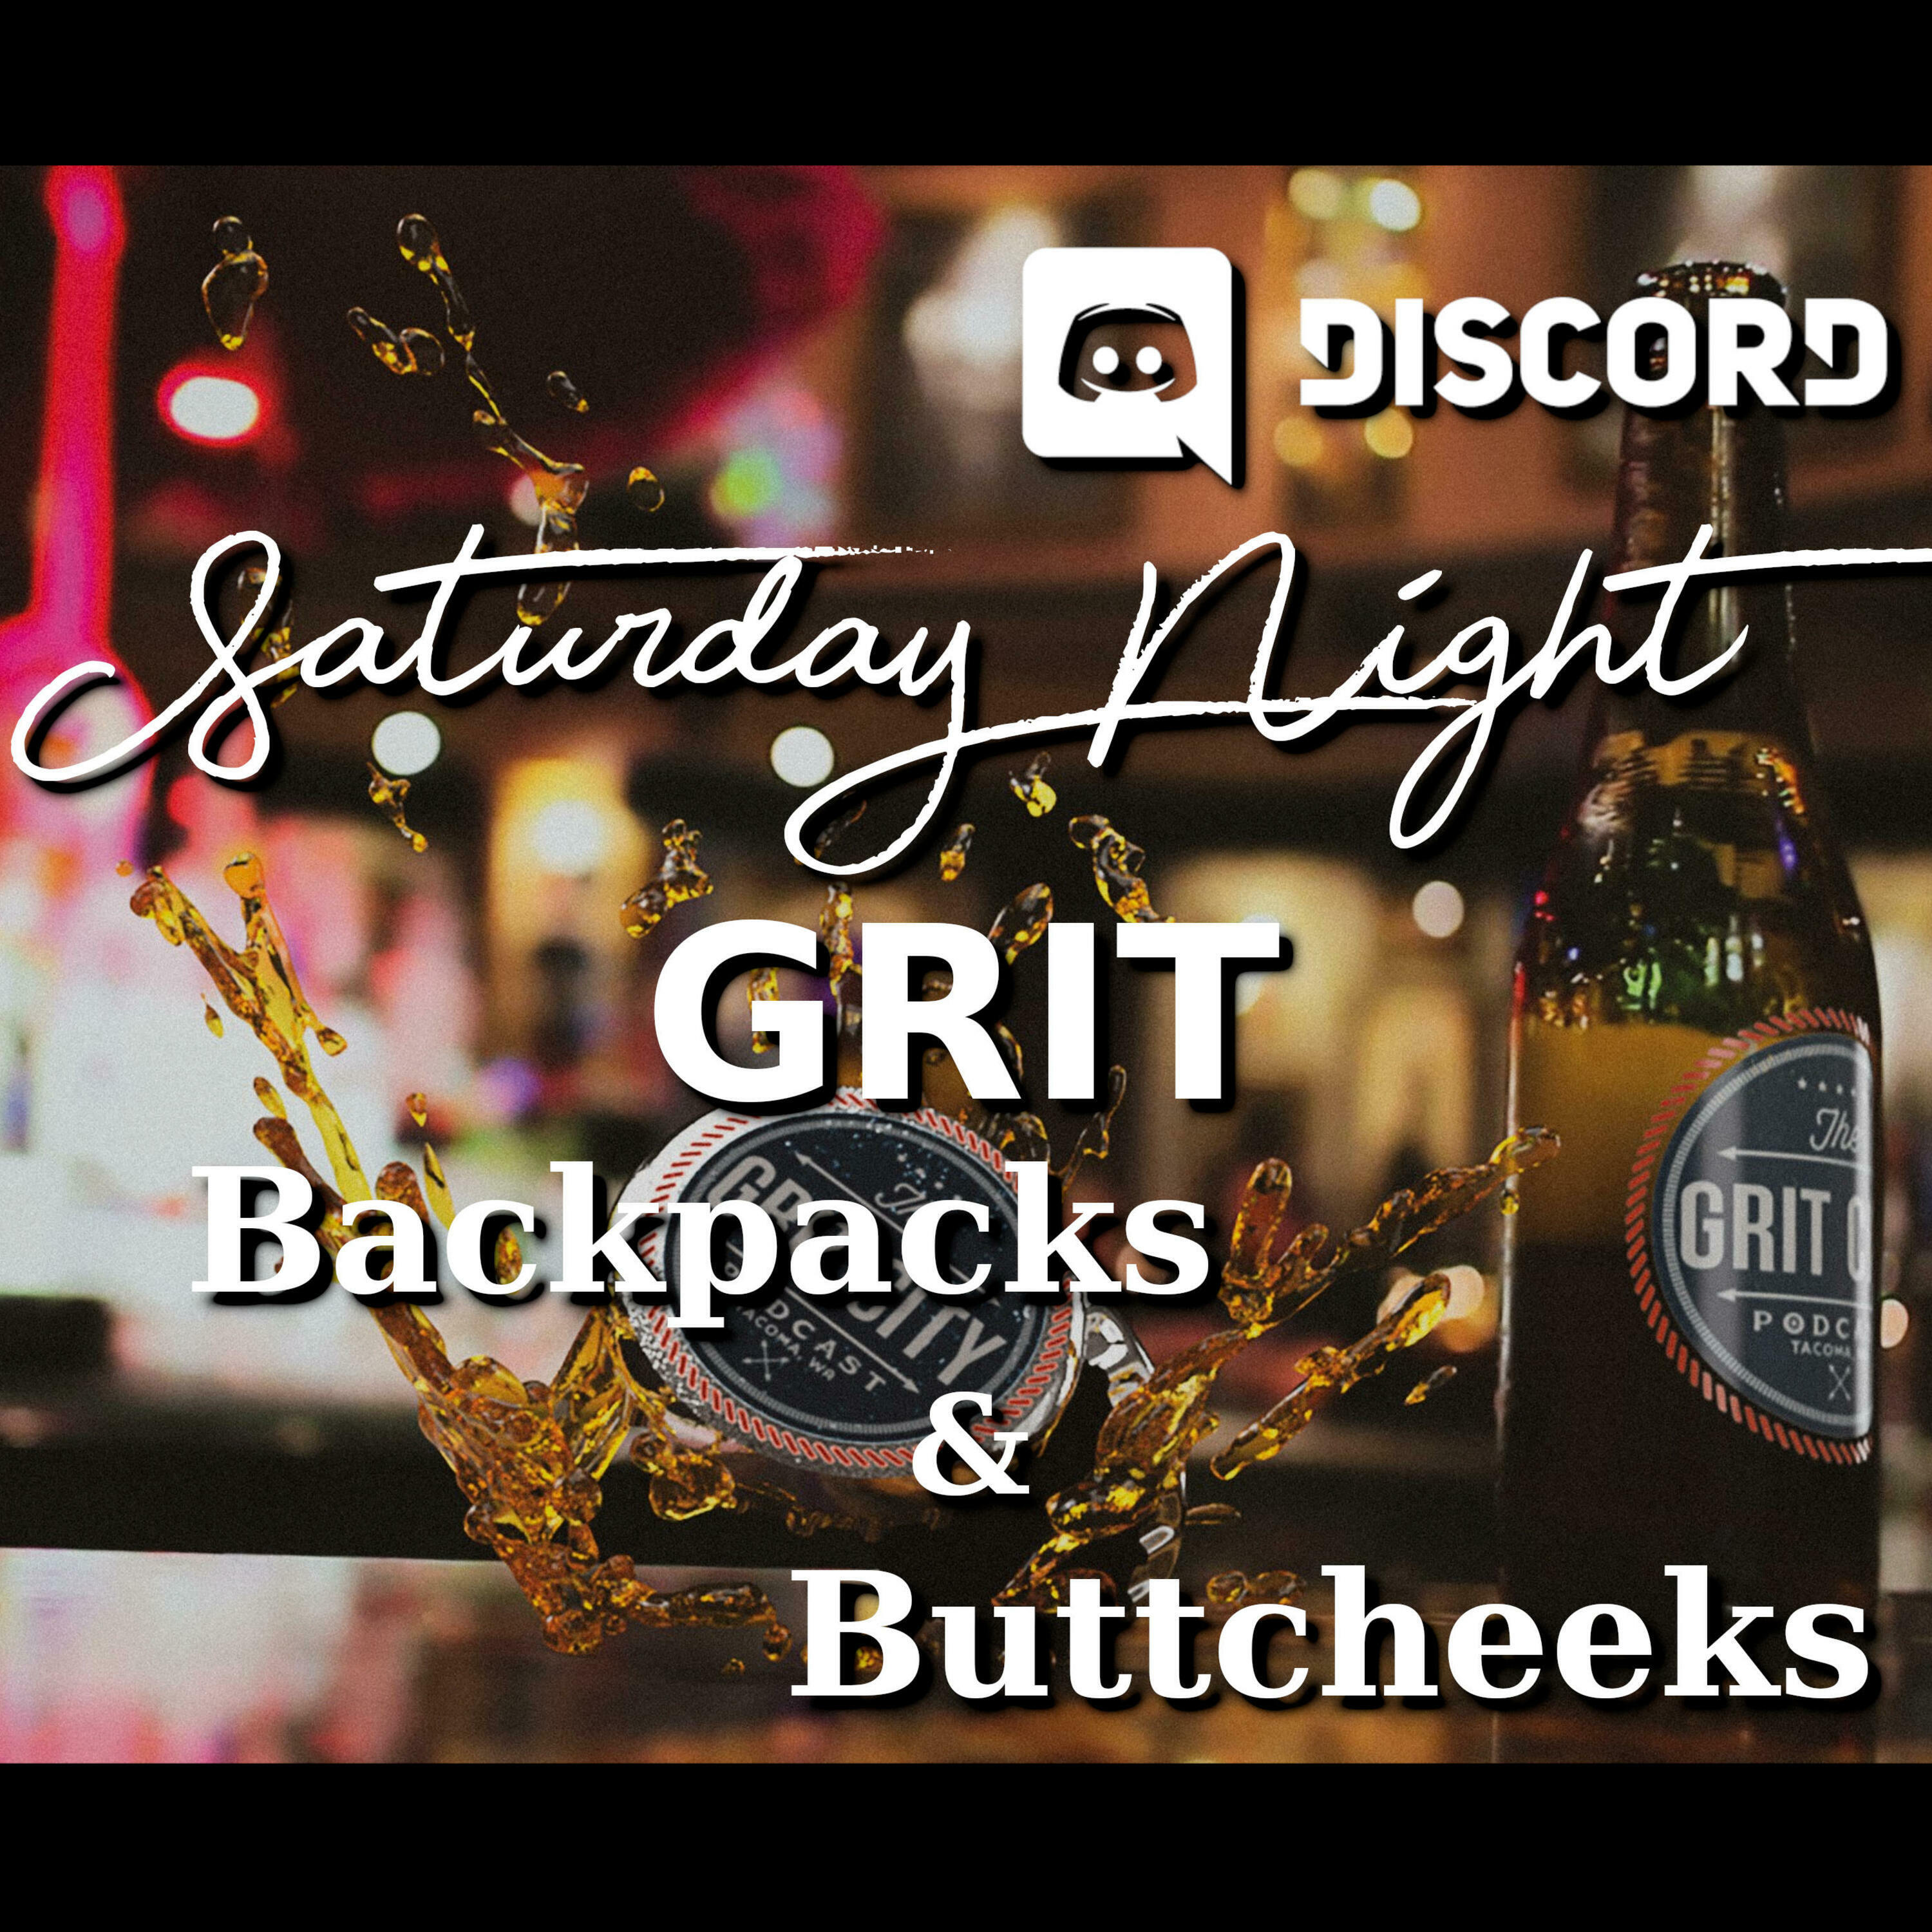 Saturday Night Grit - Backpacks and Buttcheeks